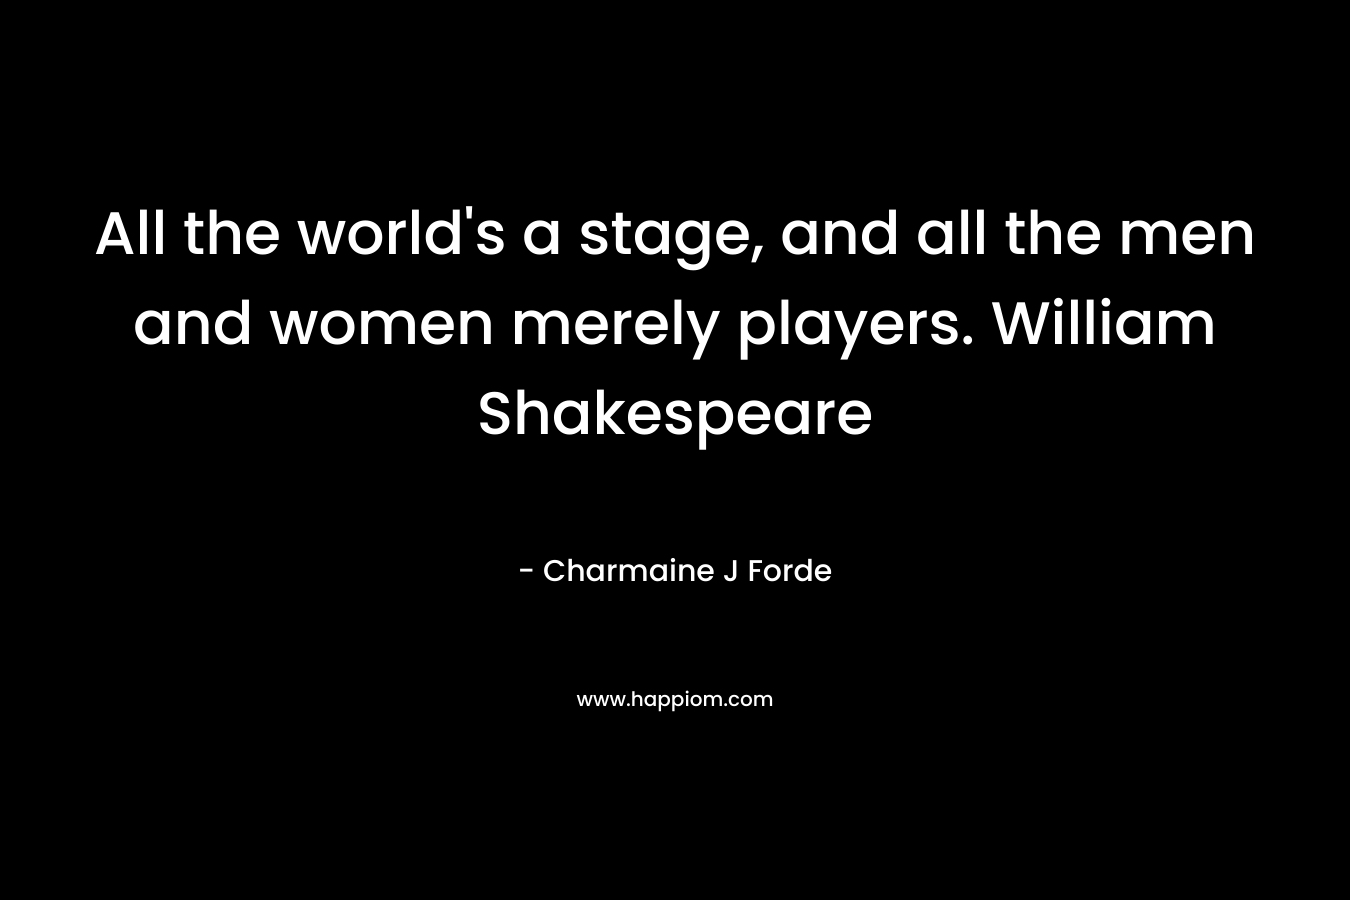 All the world's a stage, and all the men and women merely players. William Shakespeare